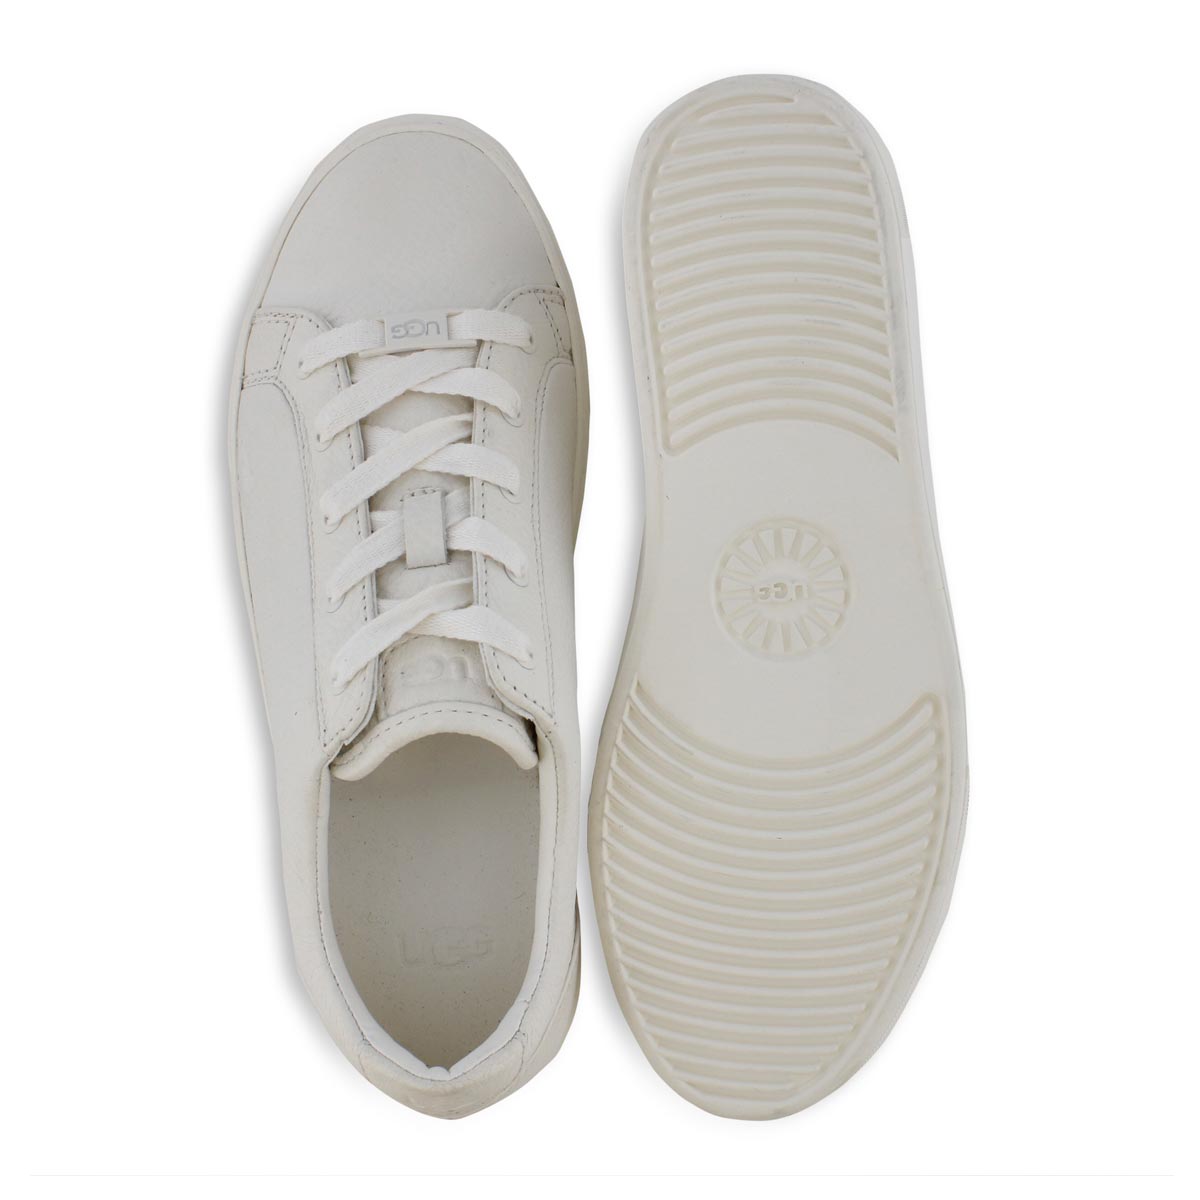 UGG Women's ZILO white lace up sneakers | SoftMoc.com